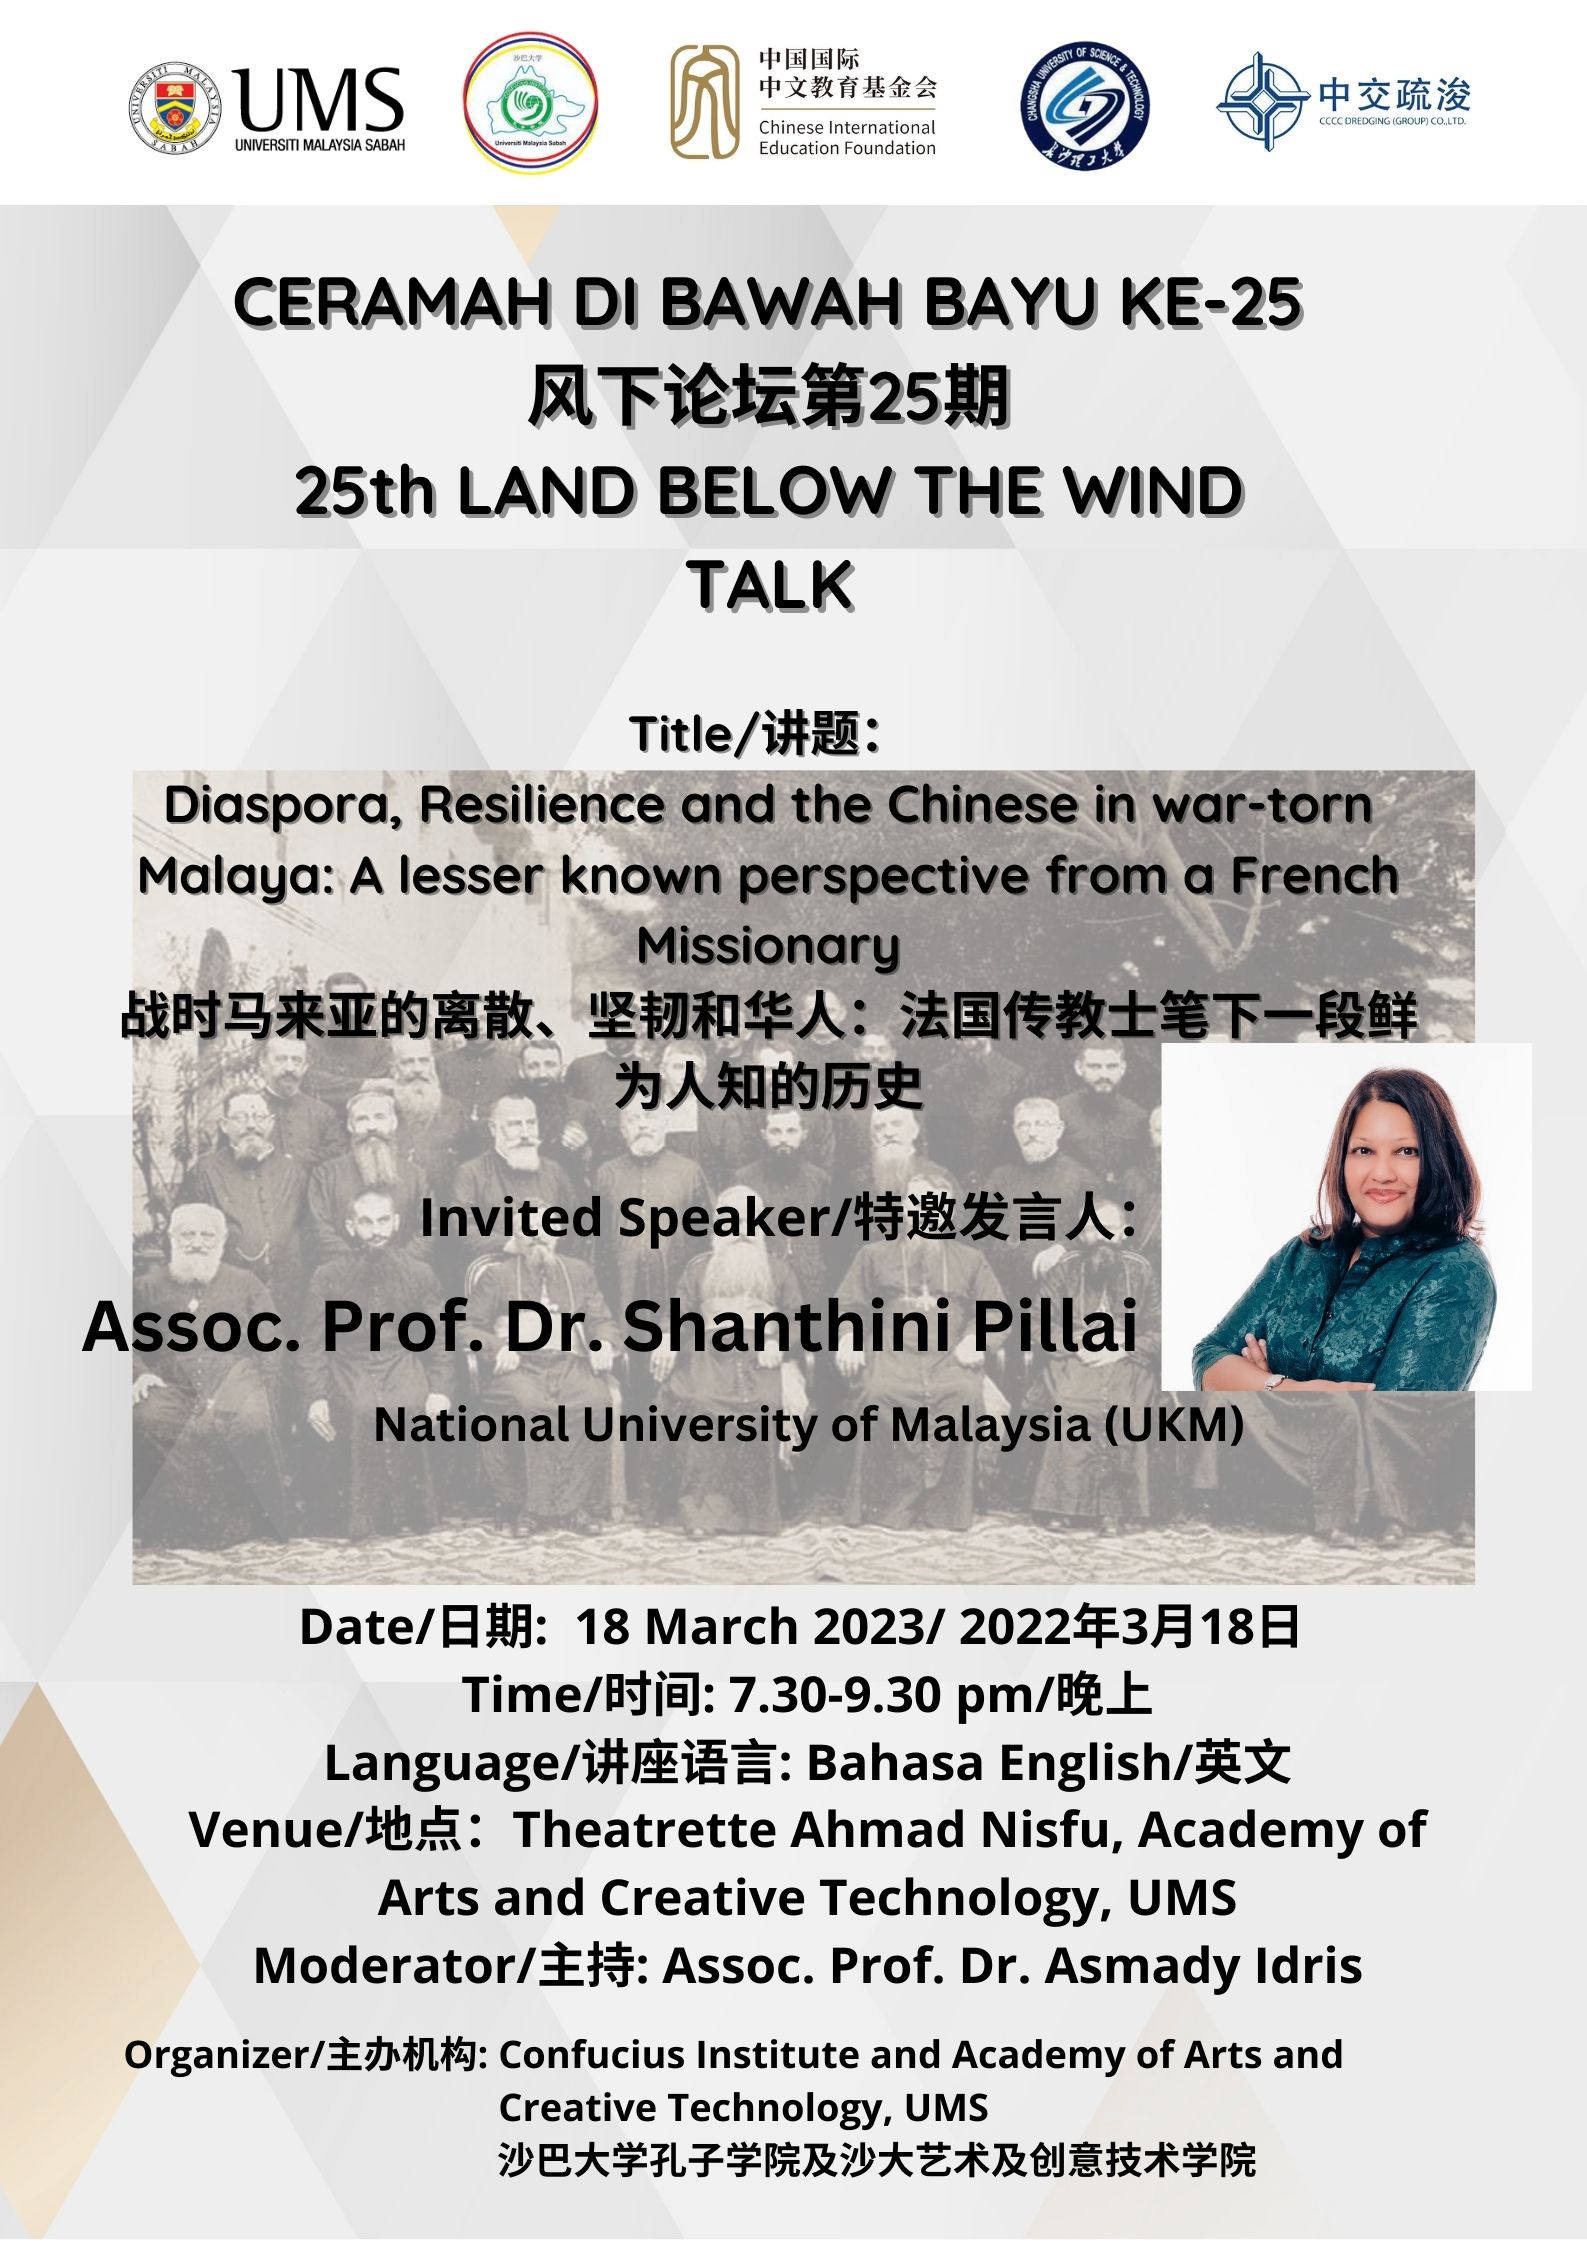 Land Below the Wind Talk 25: Diaspora, Resilience and the Chinese in War-torn Malaya: A lesser known perspective from a French Missionary